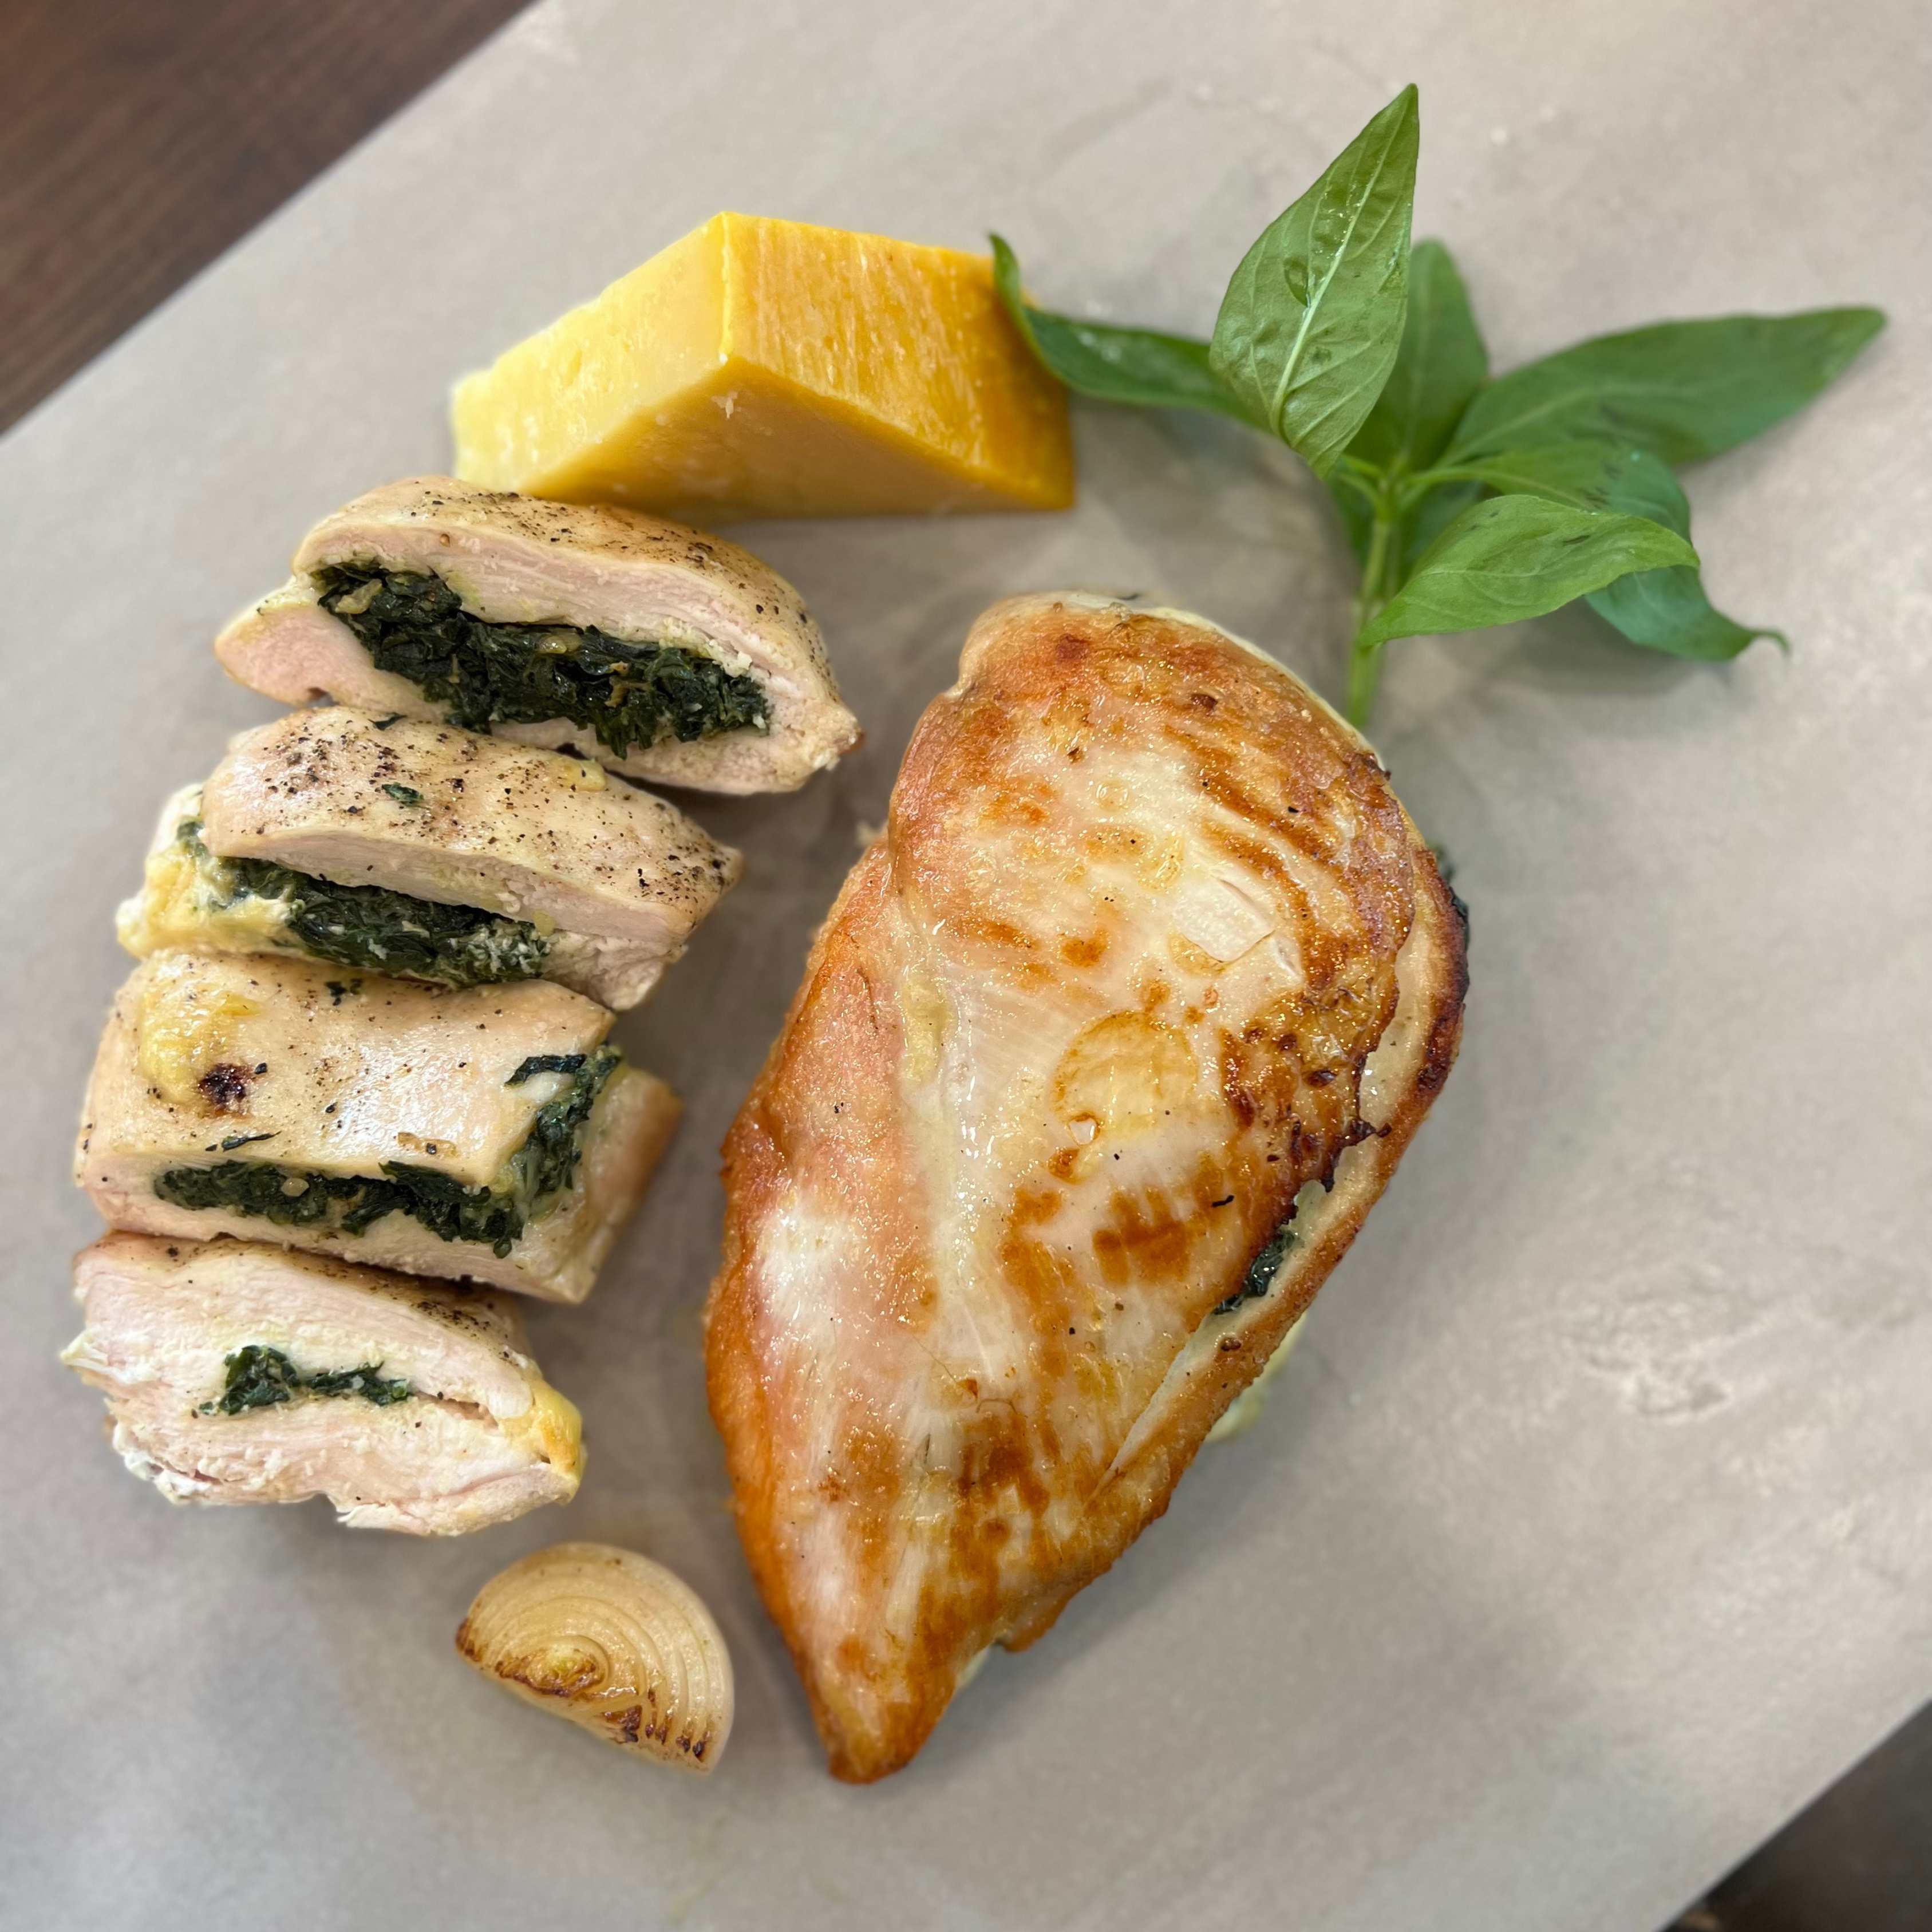 Spinach and Kale Stuffed Chicken Breast (1 pc)